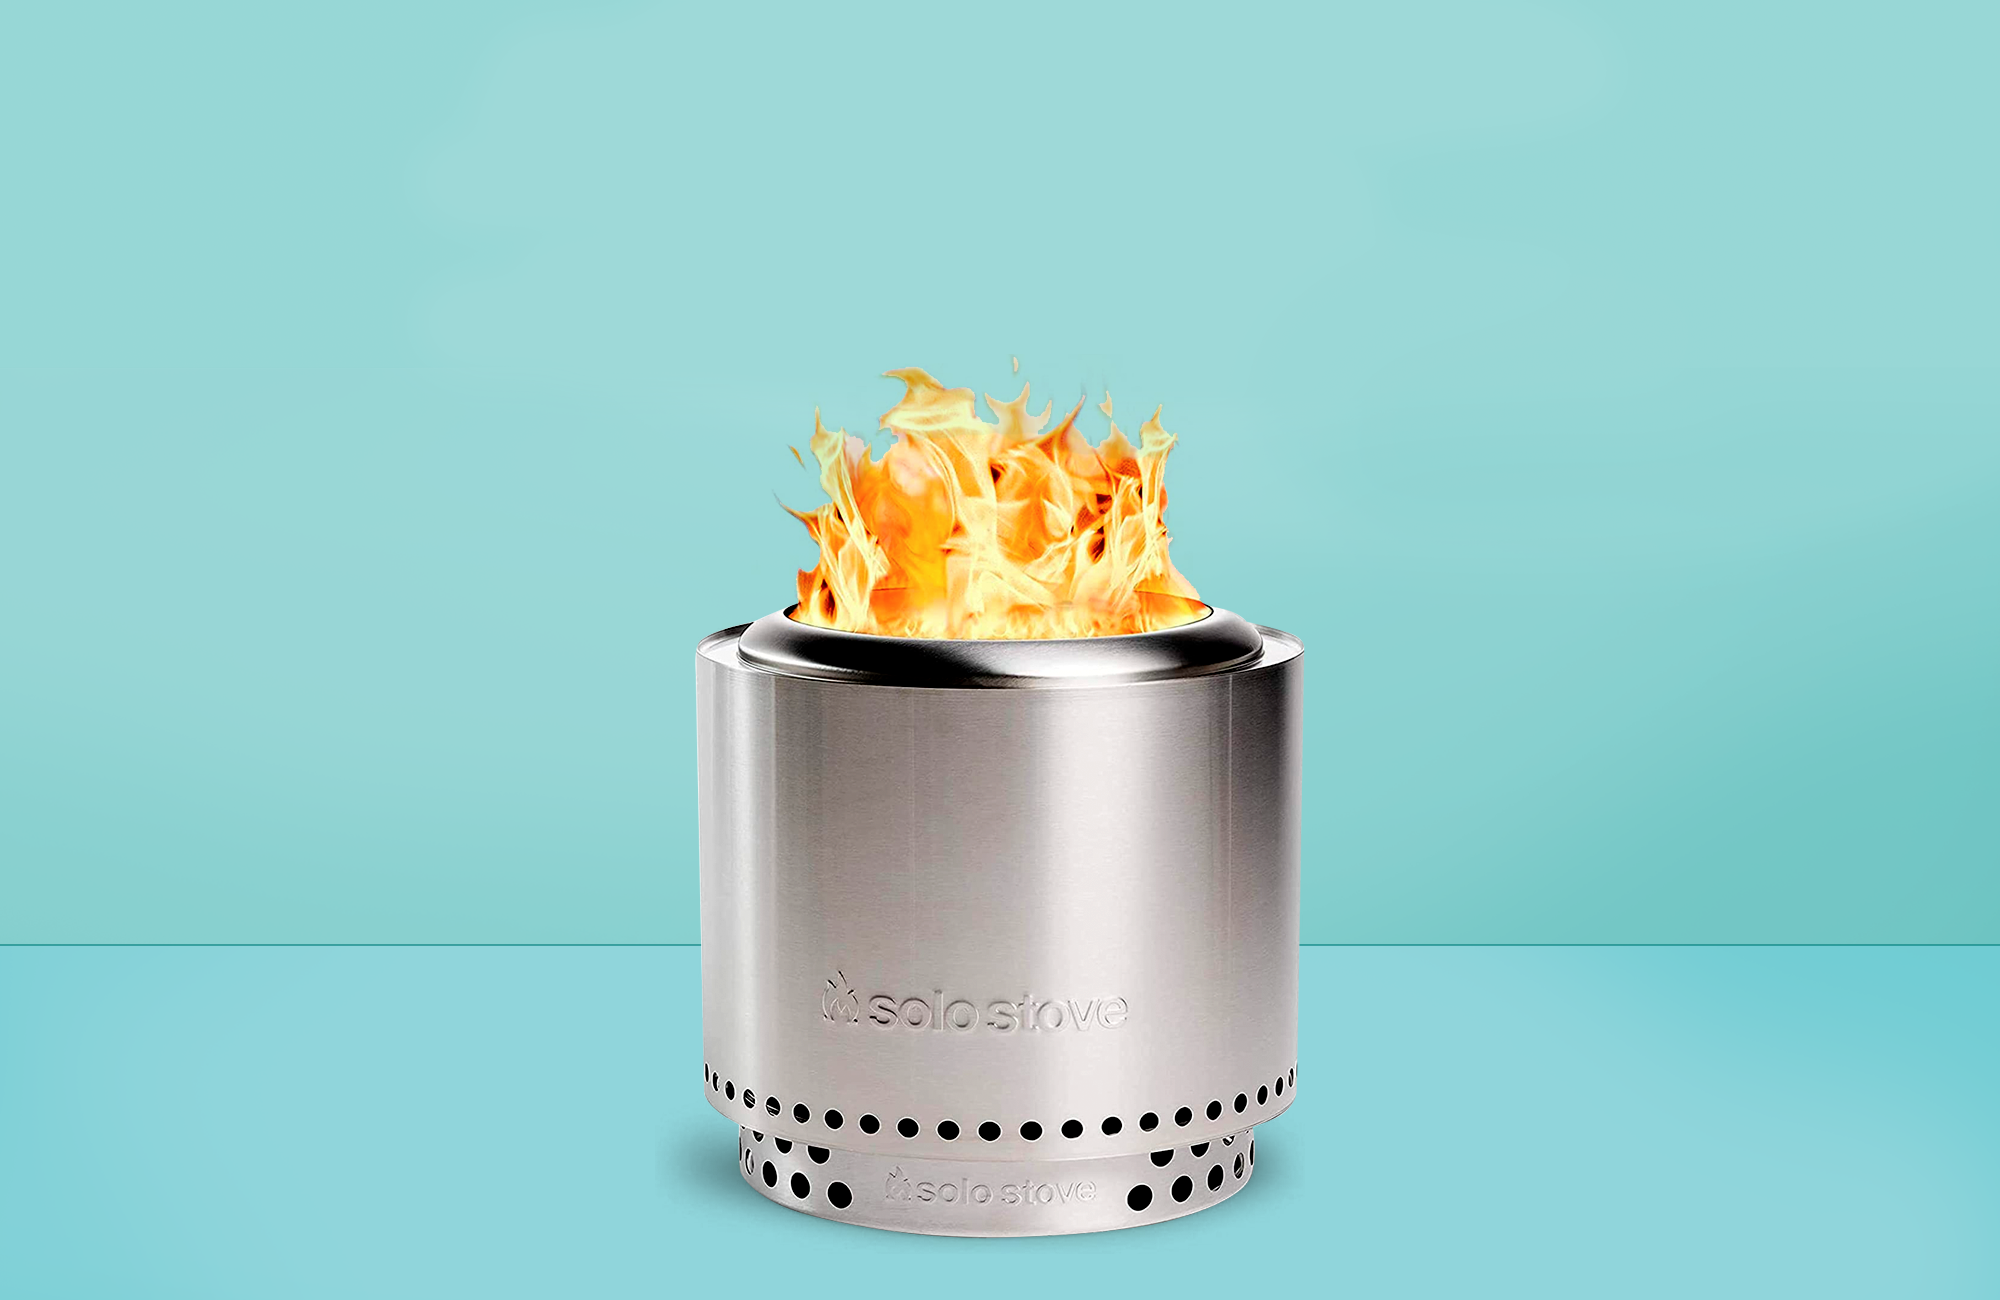 https://hips.hearstapps.com/hmg-prod/images/gh-081722-solo-stove-review-1661356981.png